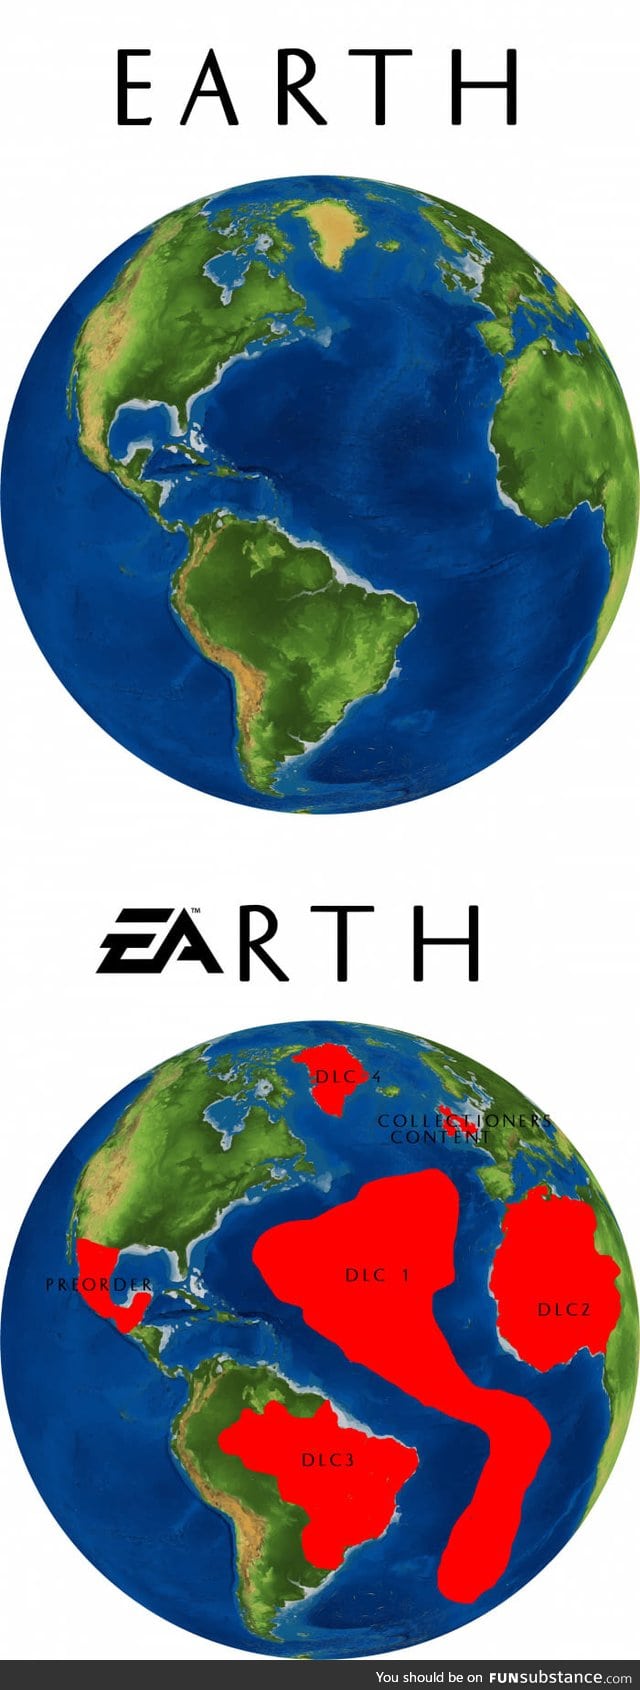 Good that Earth is not designed by them